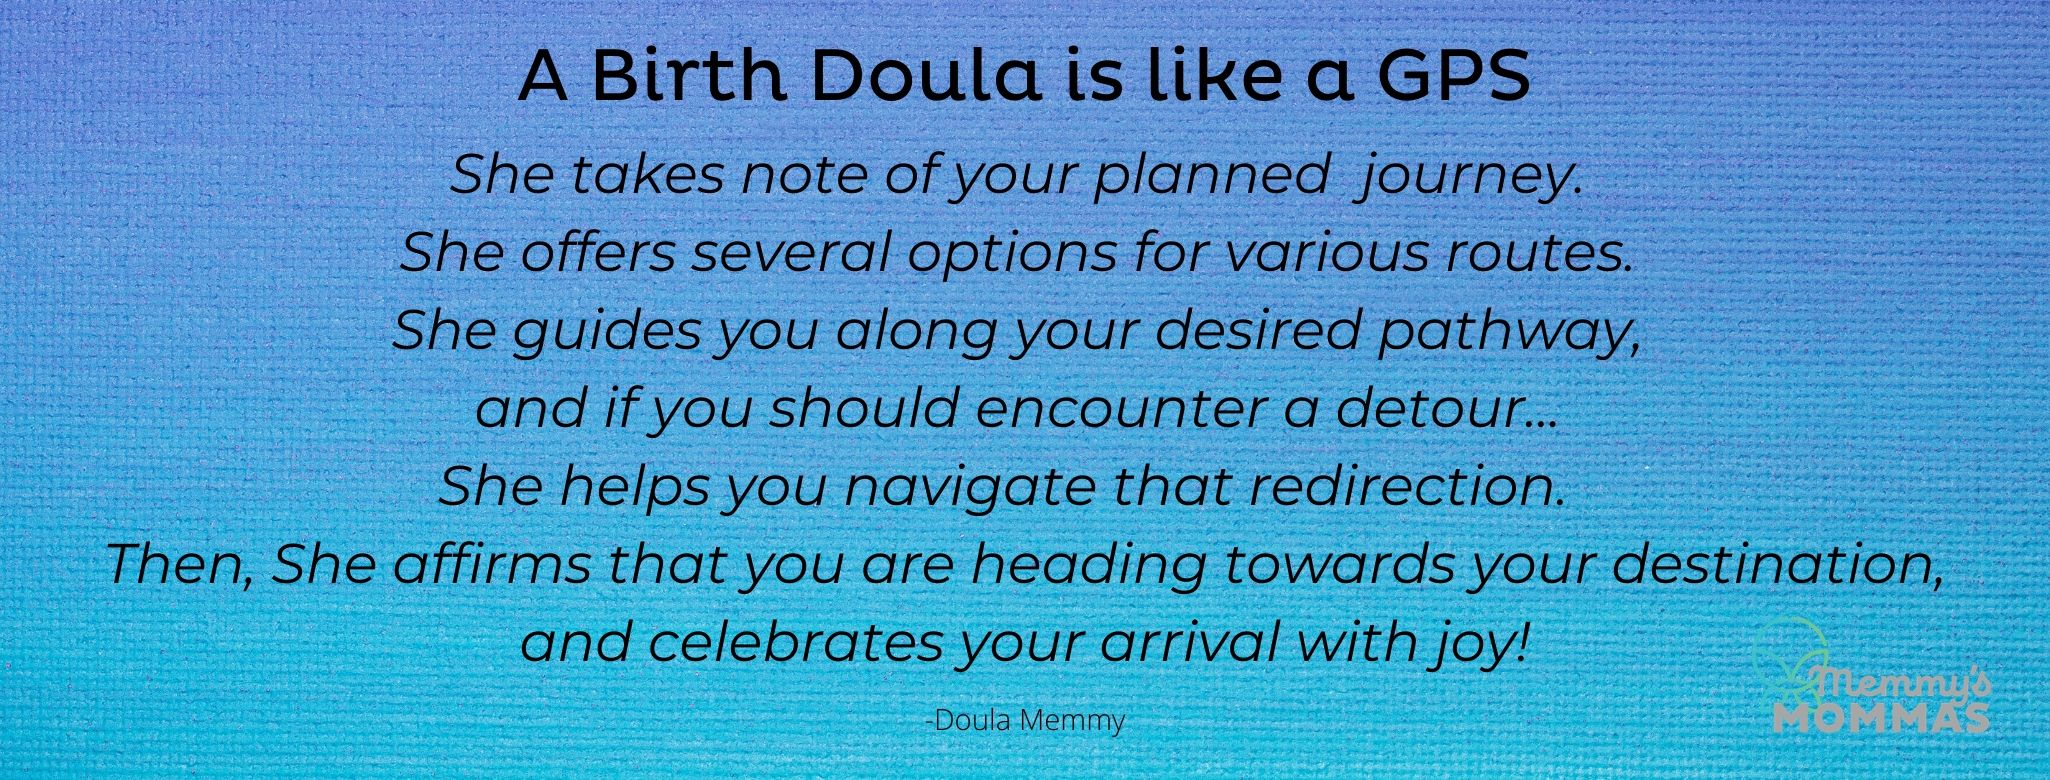 A Birth Doula provides support